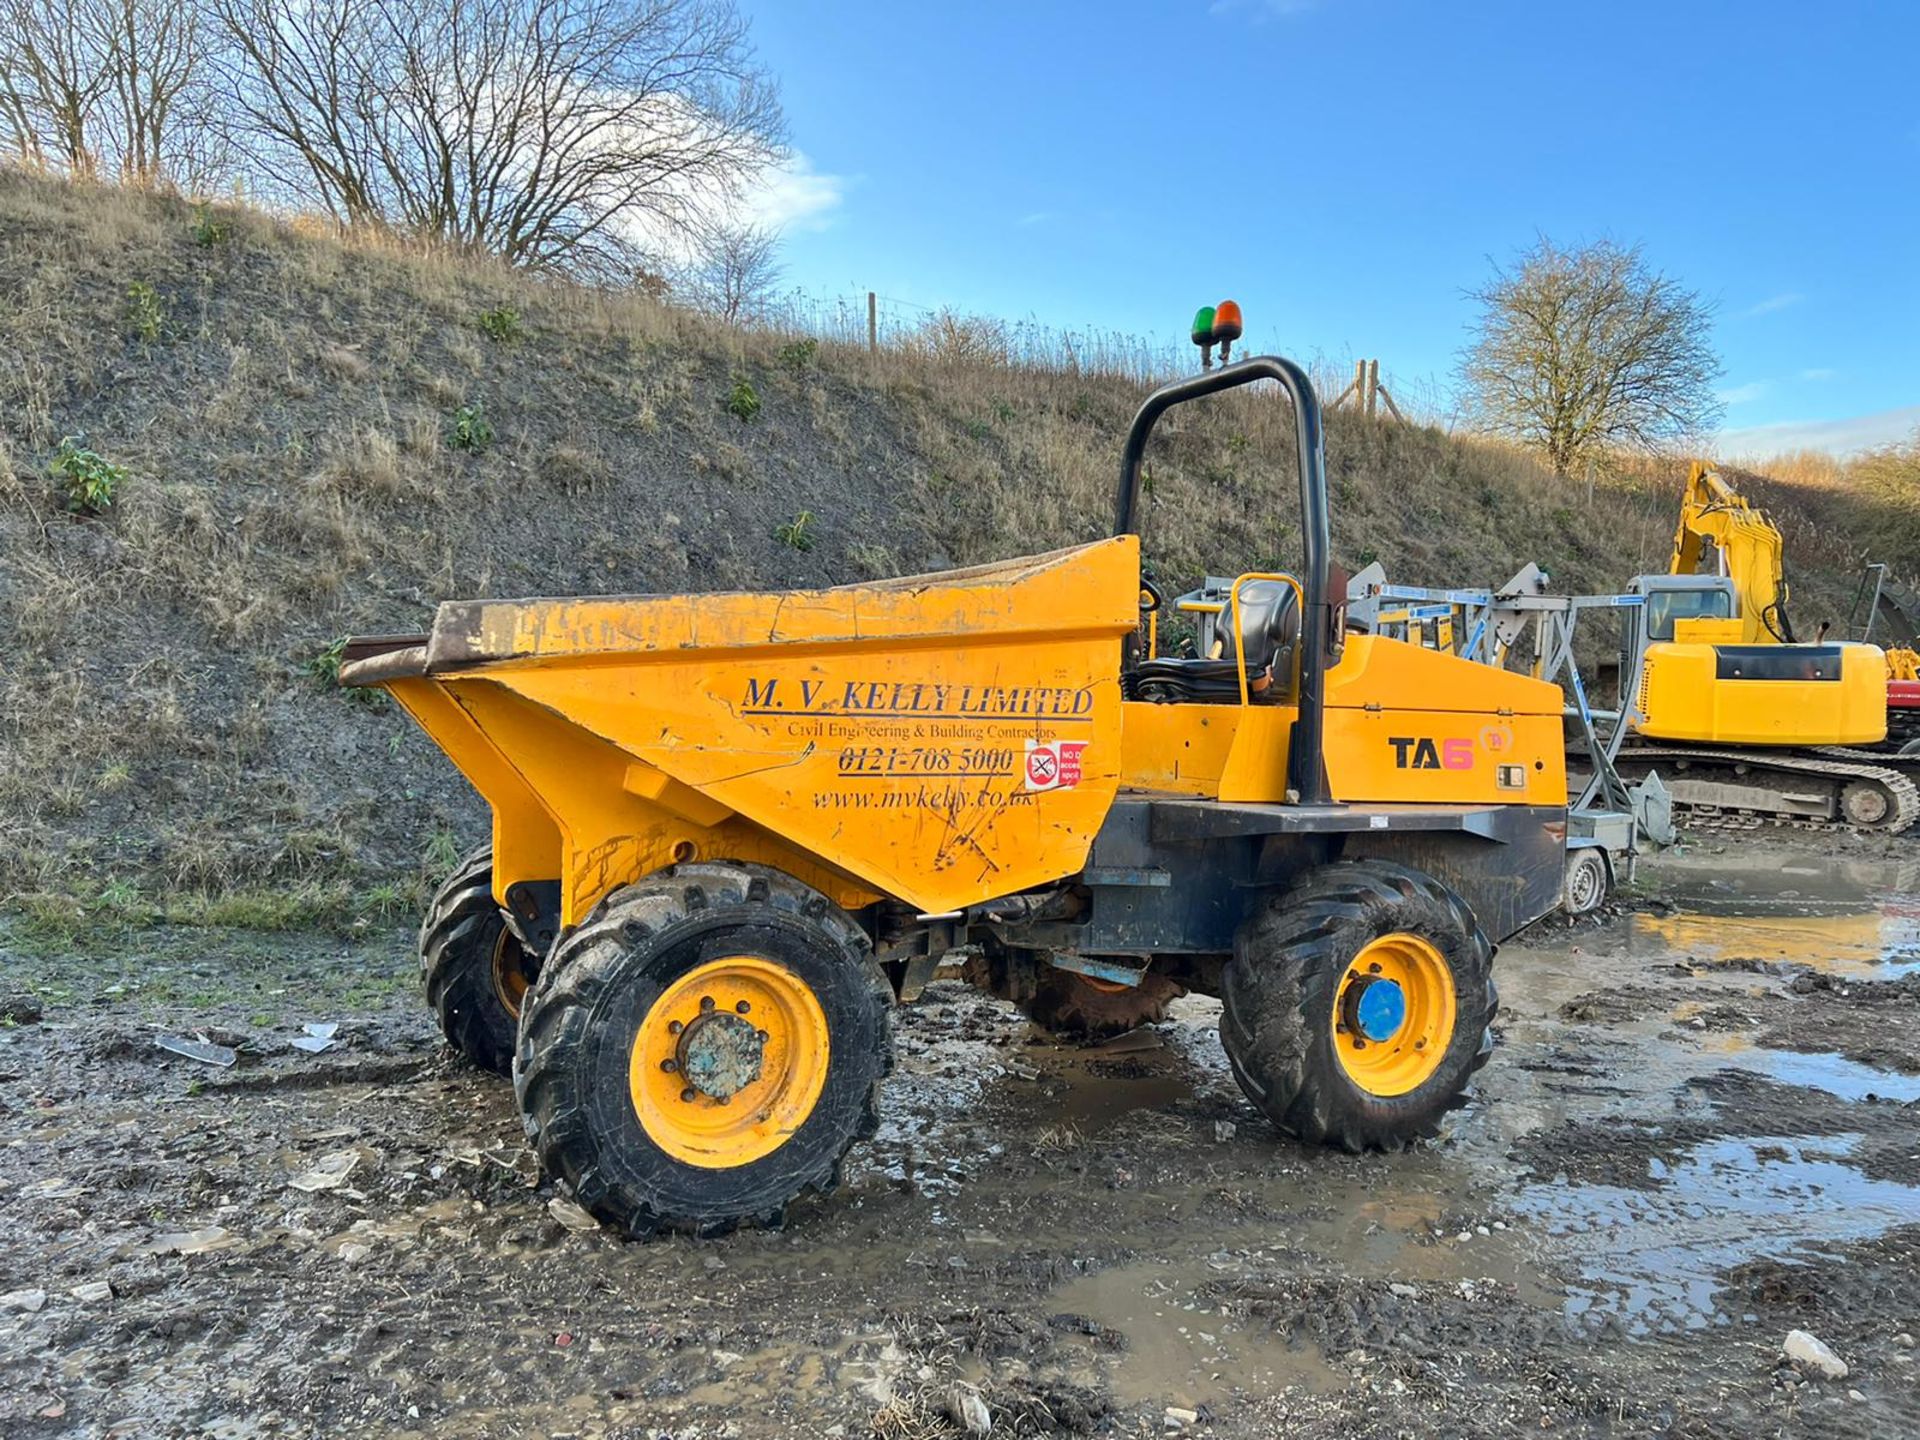 2017 MECALAC TA6 4WD 6 TON DUMPER, RUSN DRIVES AND TIPS, SHOWING A LOW 1273 HOURS *PLUS VAT* - Image 4 of 12